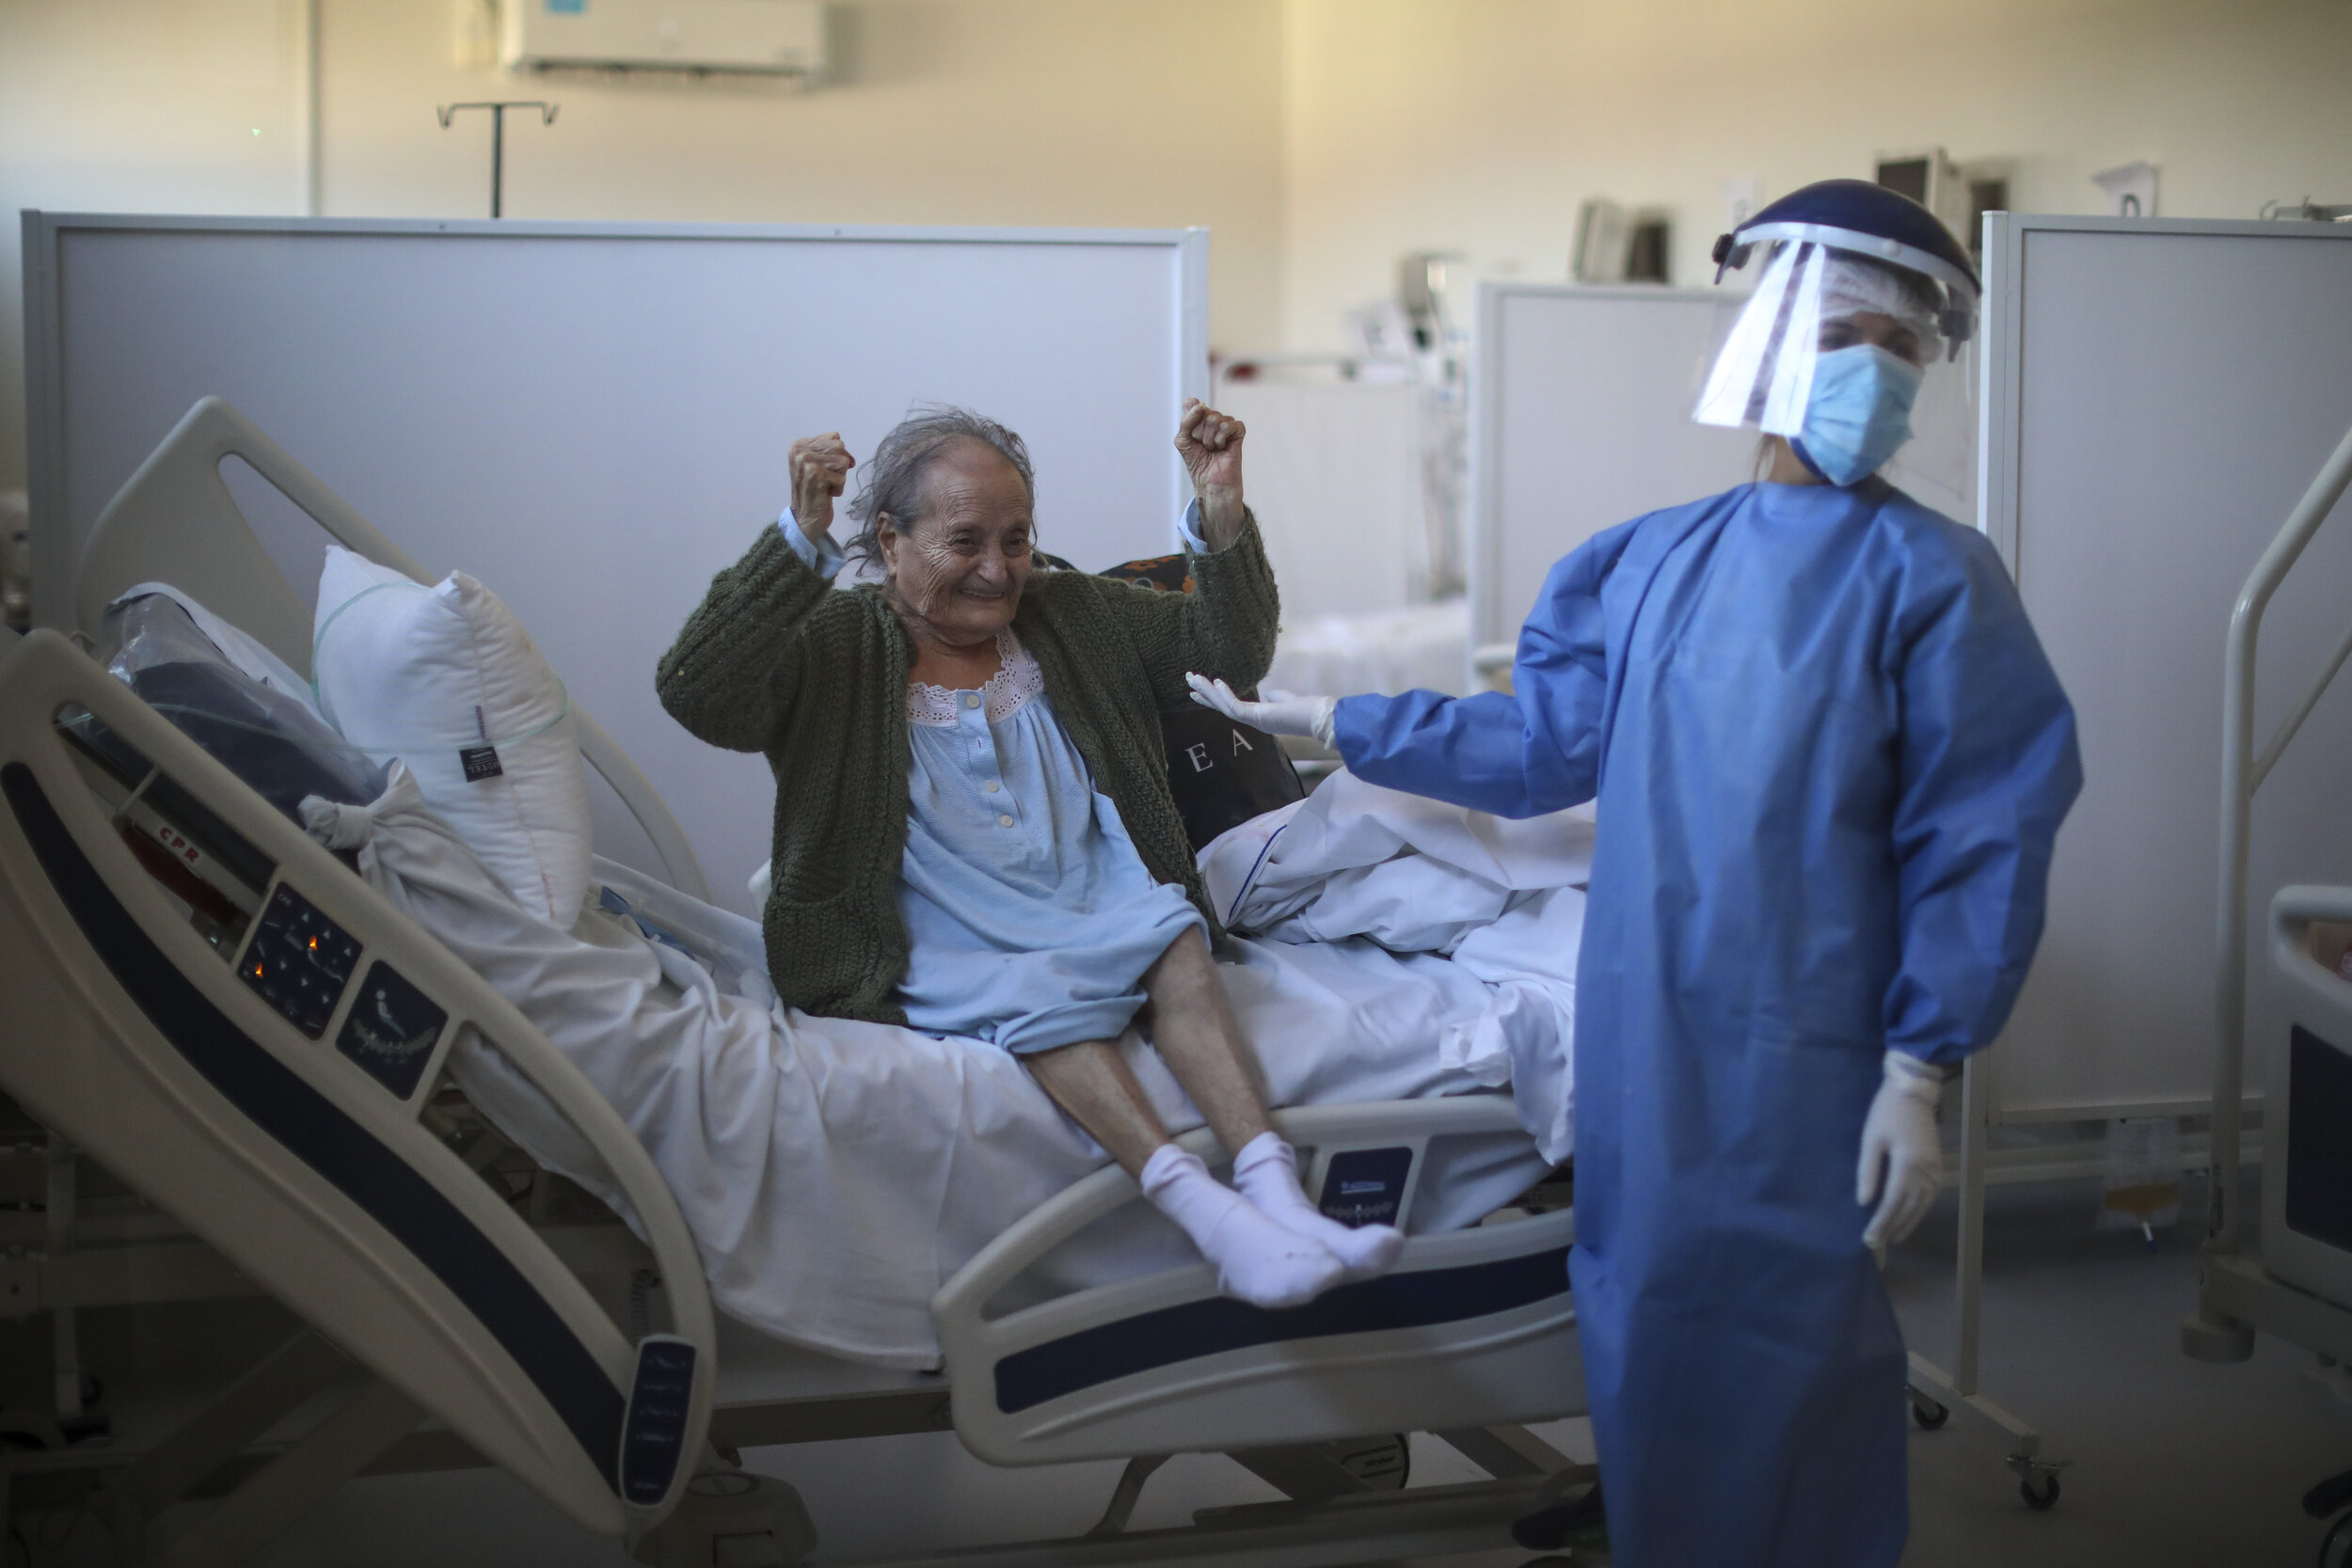  Blanca Ortiz, 84, celebrates after learning from nurses that she will be dismissed from the Eurnekian Ezeiza Hospital, on the outskirts of Buenos Aires, Argentina, Aug. 13, 2020, several weeks after being admitted with COVID-19. (AP Photo/Natacha Pi